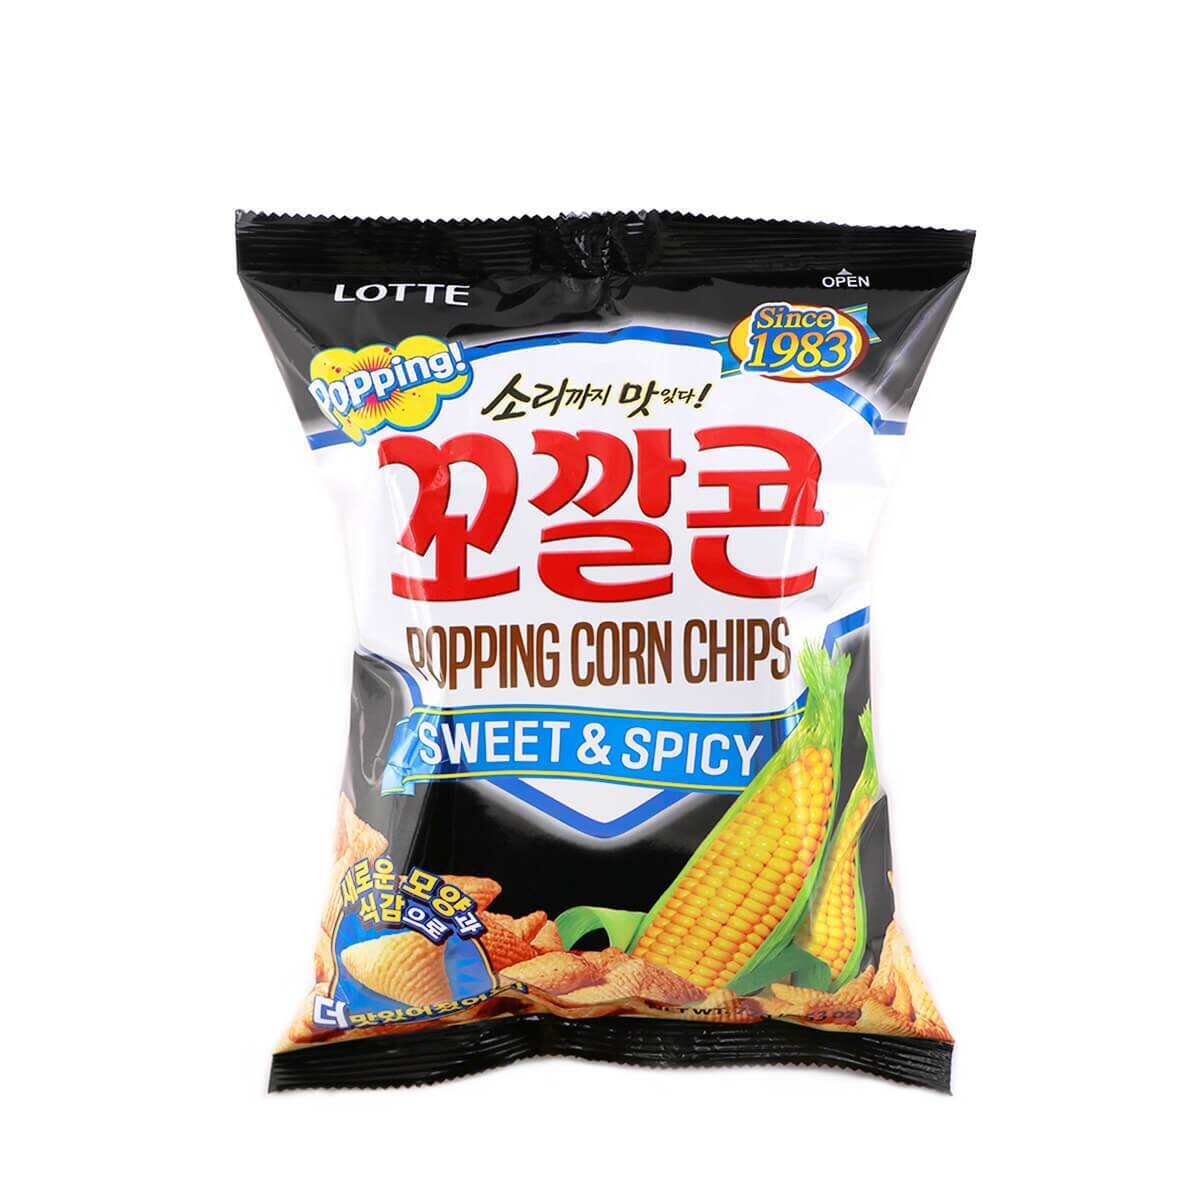 Lotte Sweet & Spicy Popping Corn Chips (144G)